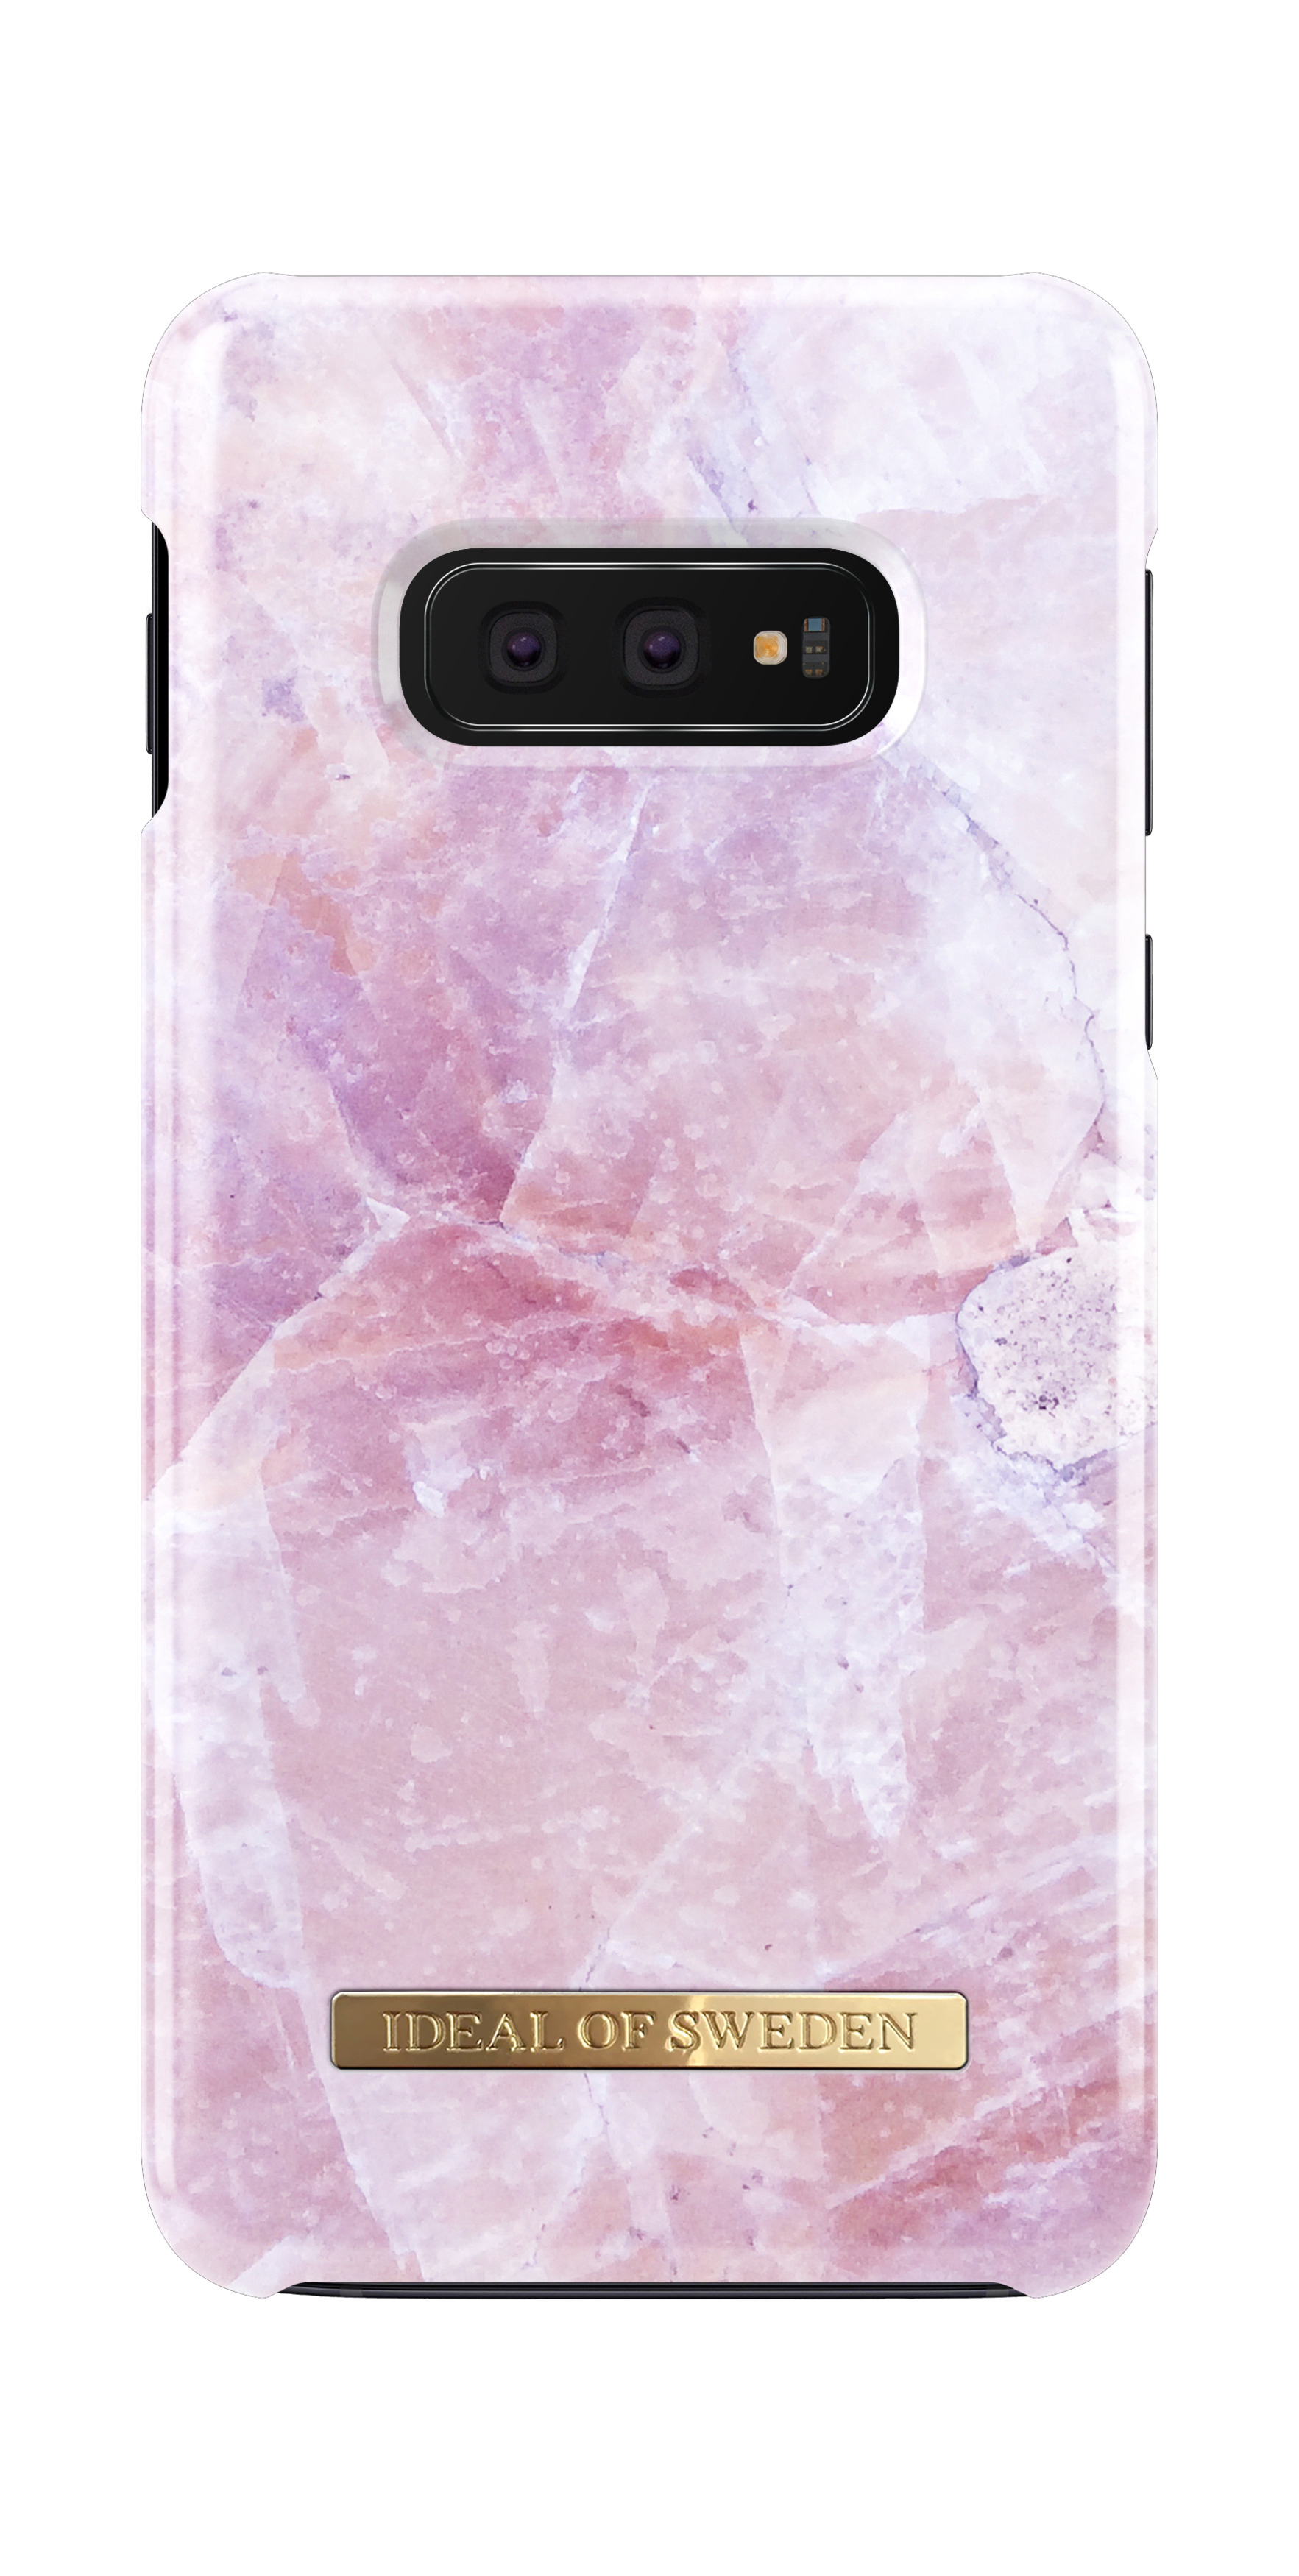 Antique Samsung, Roses Galaxy S10e, IDEAL Fashion, Backcover, SWEDEN OF